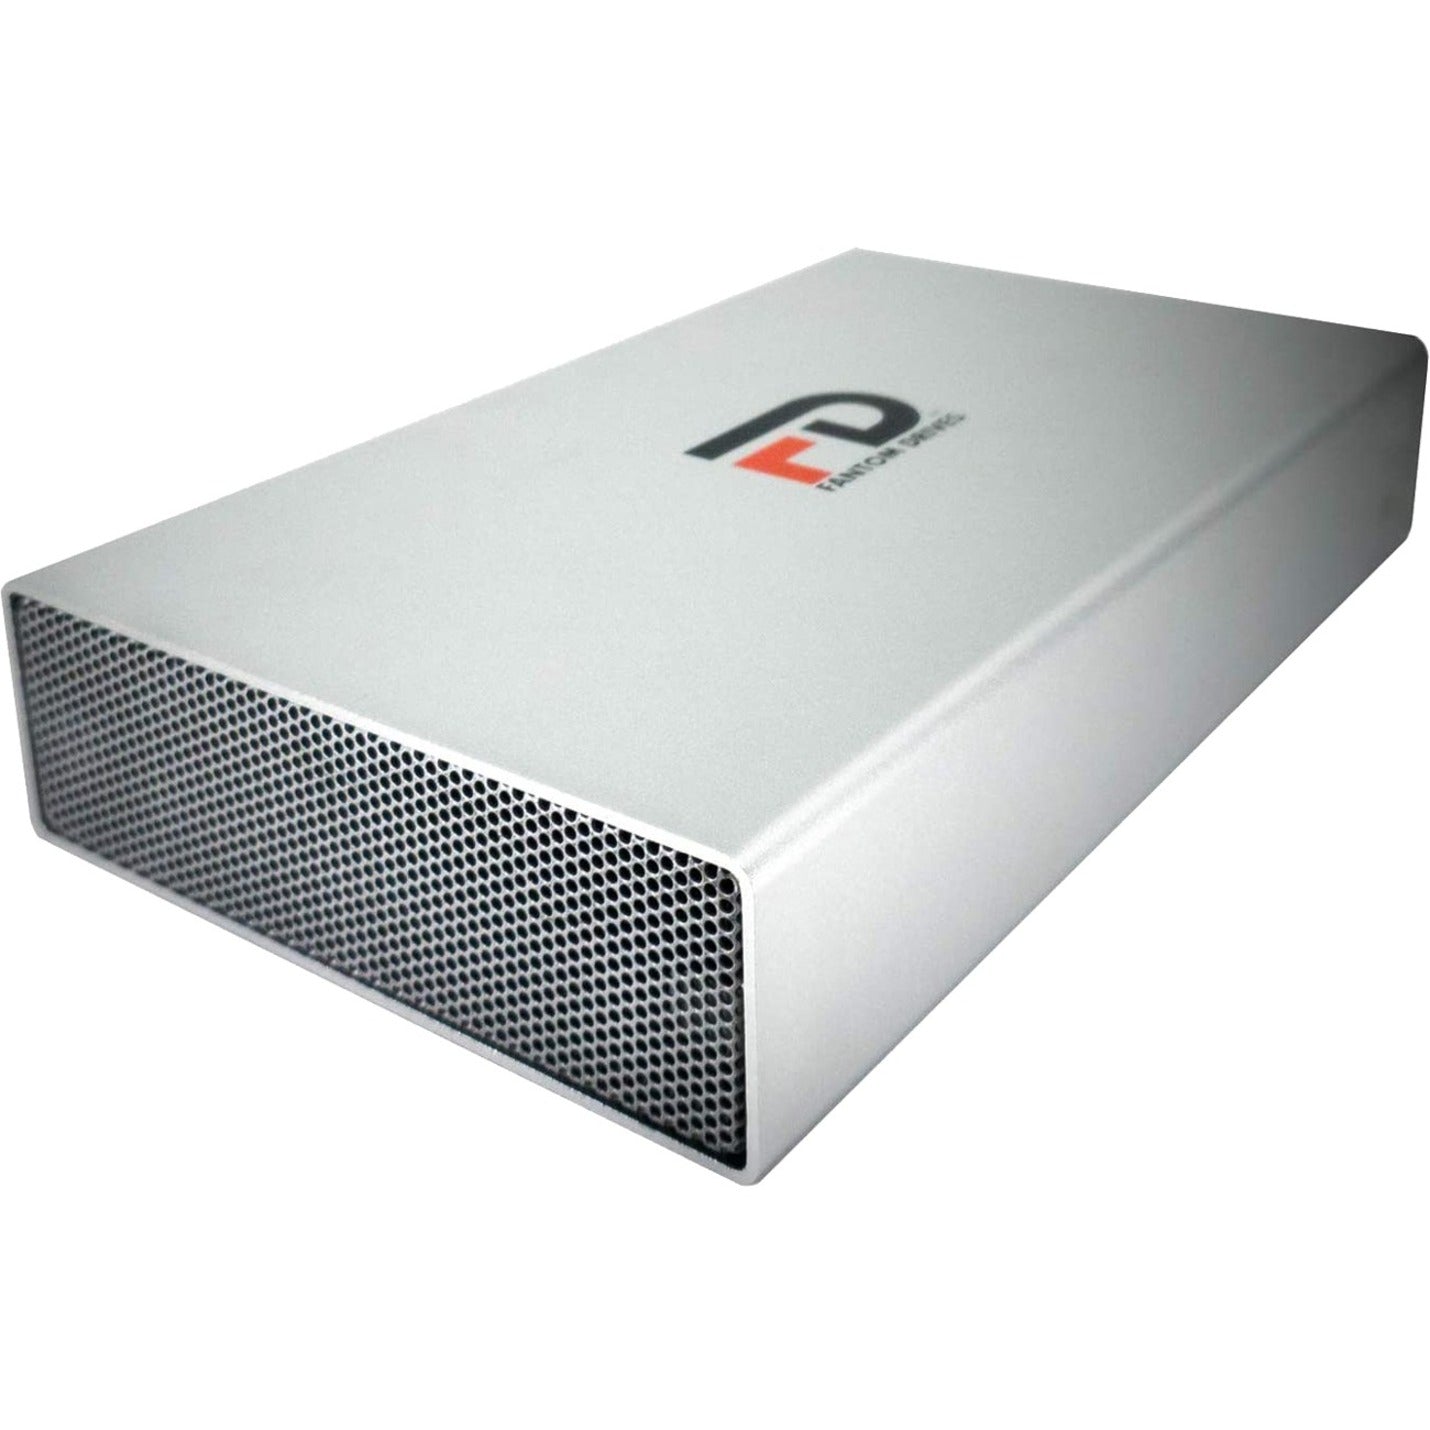 Fantom Drives FD GFORCE 2TB 7200RPM External Hard Drive - USB 3.2 Gen 1 & eSATA - Silver - Compatible with Windows & Mac - Made with High Quality Aluminum - 1 Year Warranty. Extra year of warranty when registered with Fantom Drives - (GFSP2000EU3)